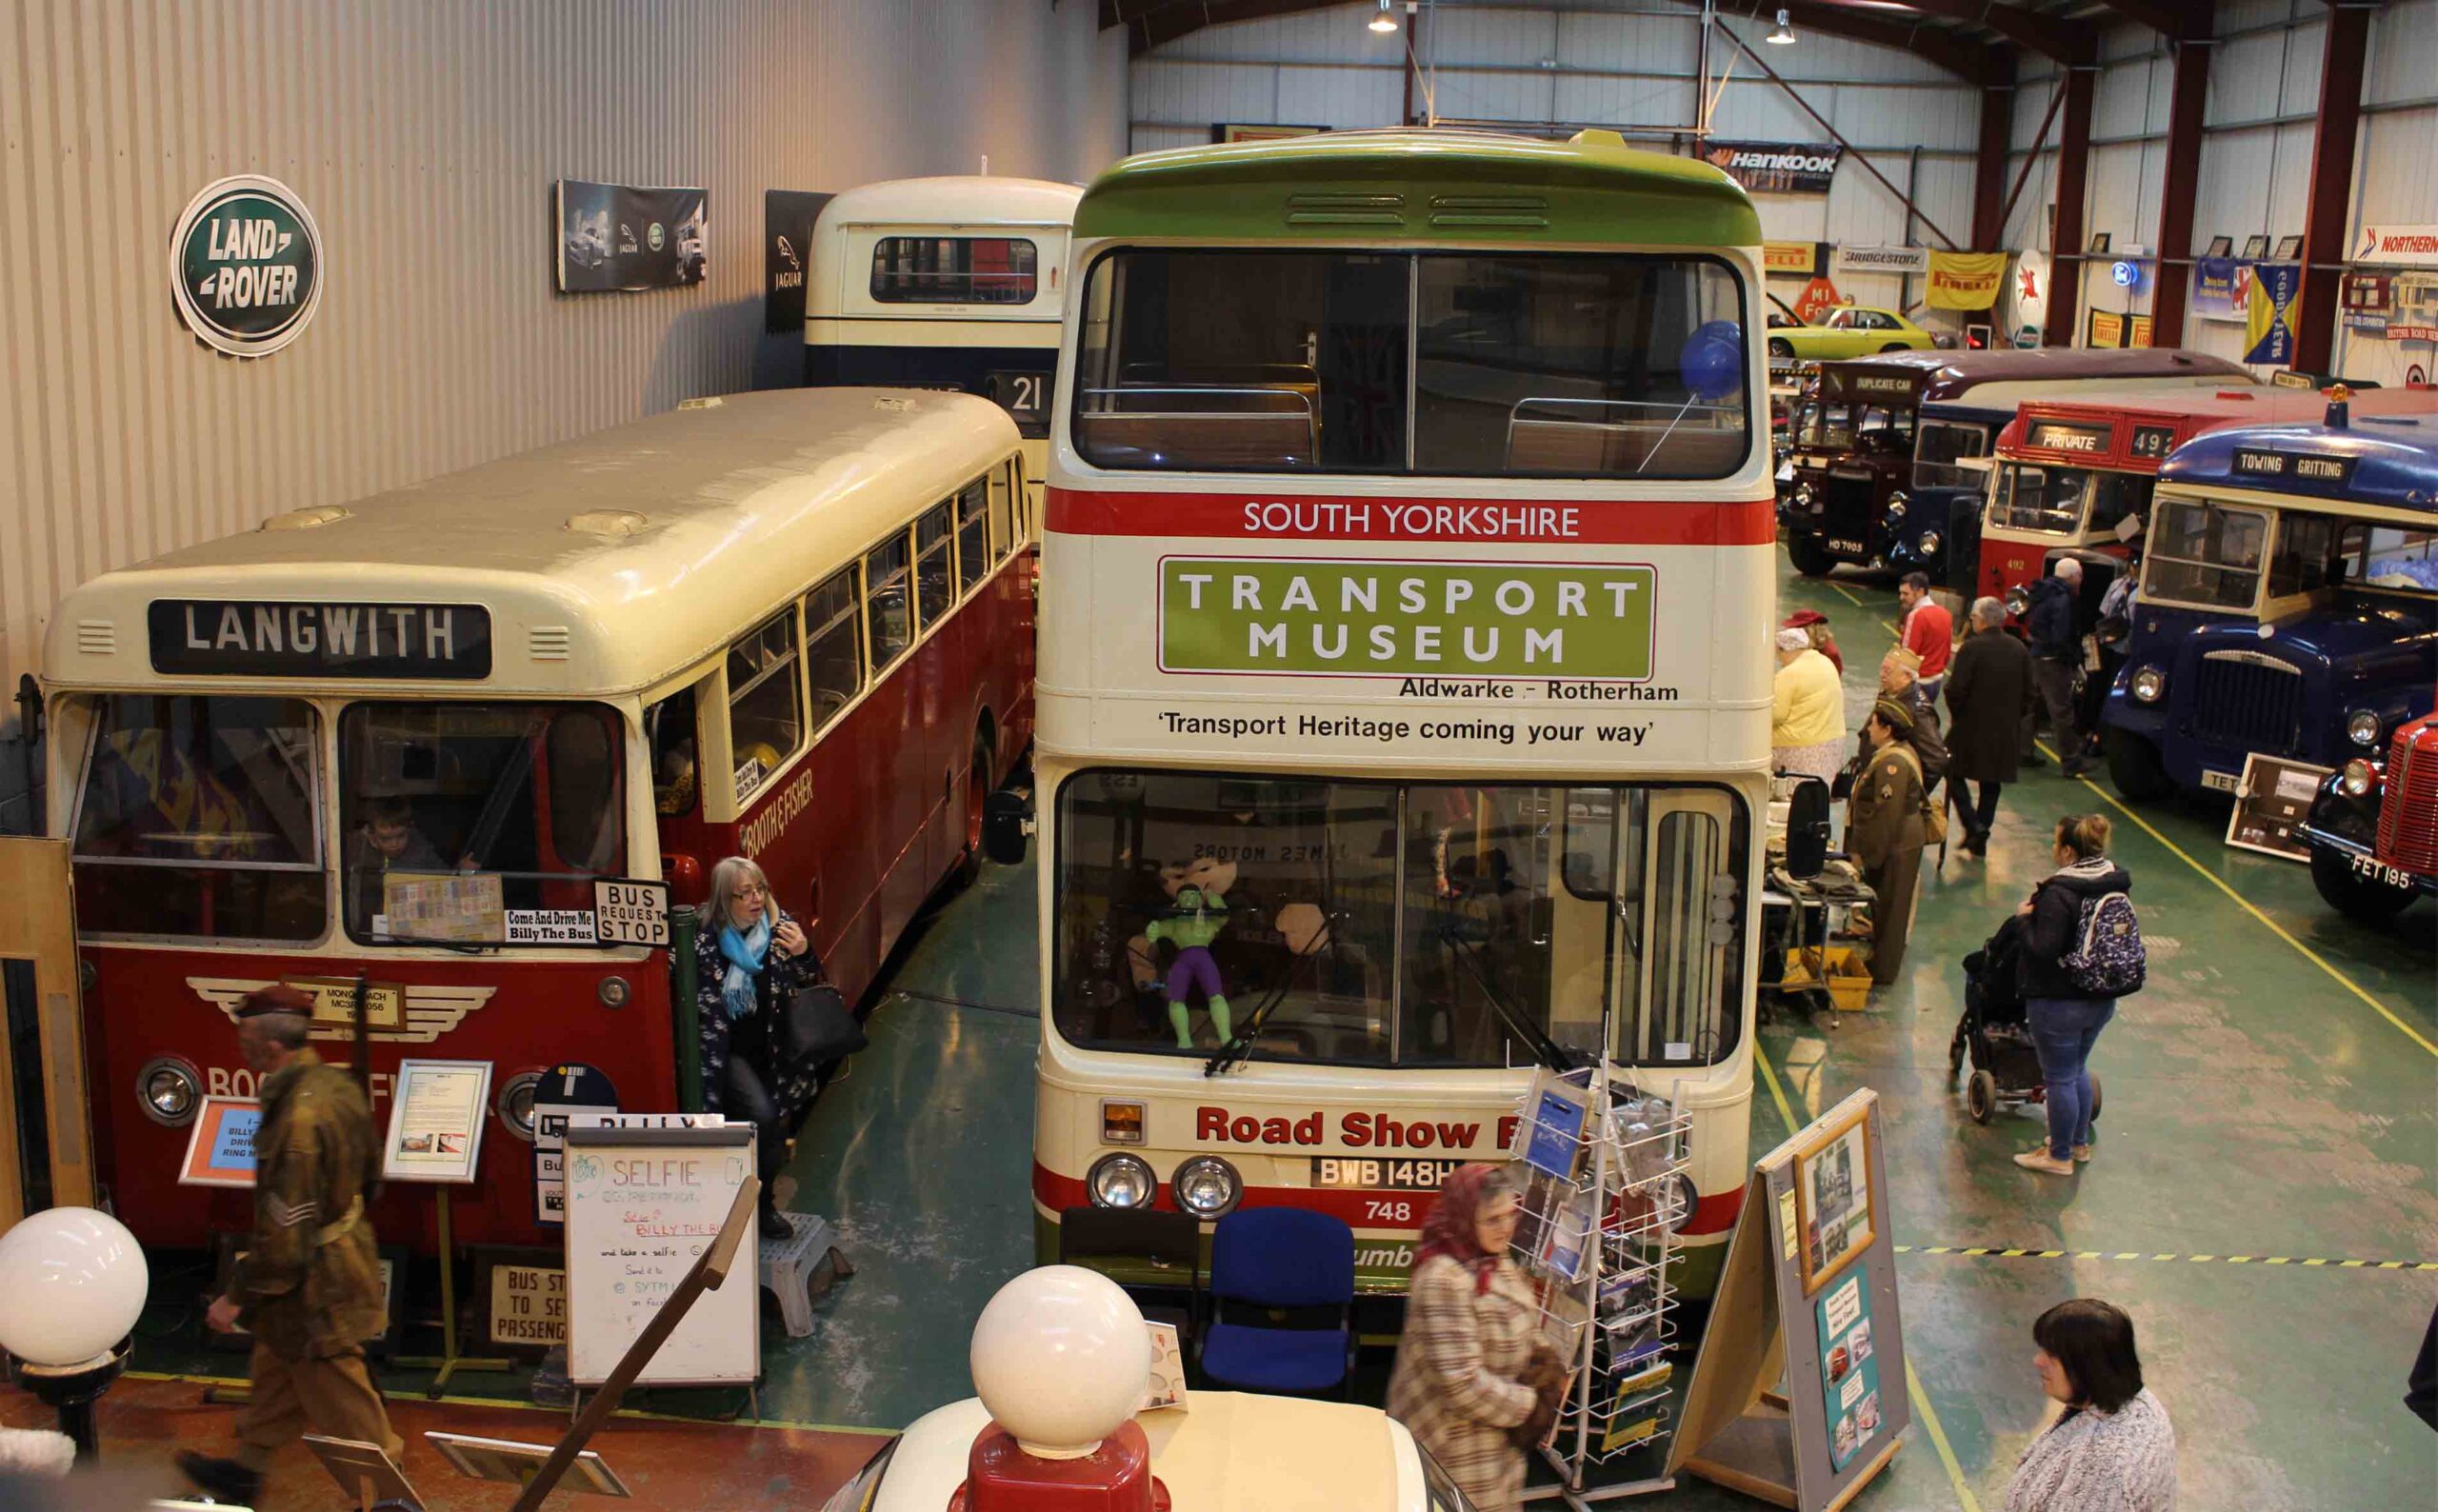 South Yorkshire Transport Museum – don’t miss this hidden gem in Rotherham!